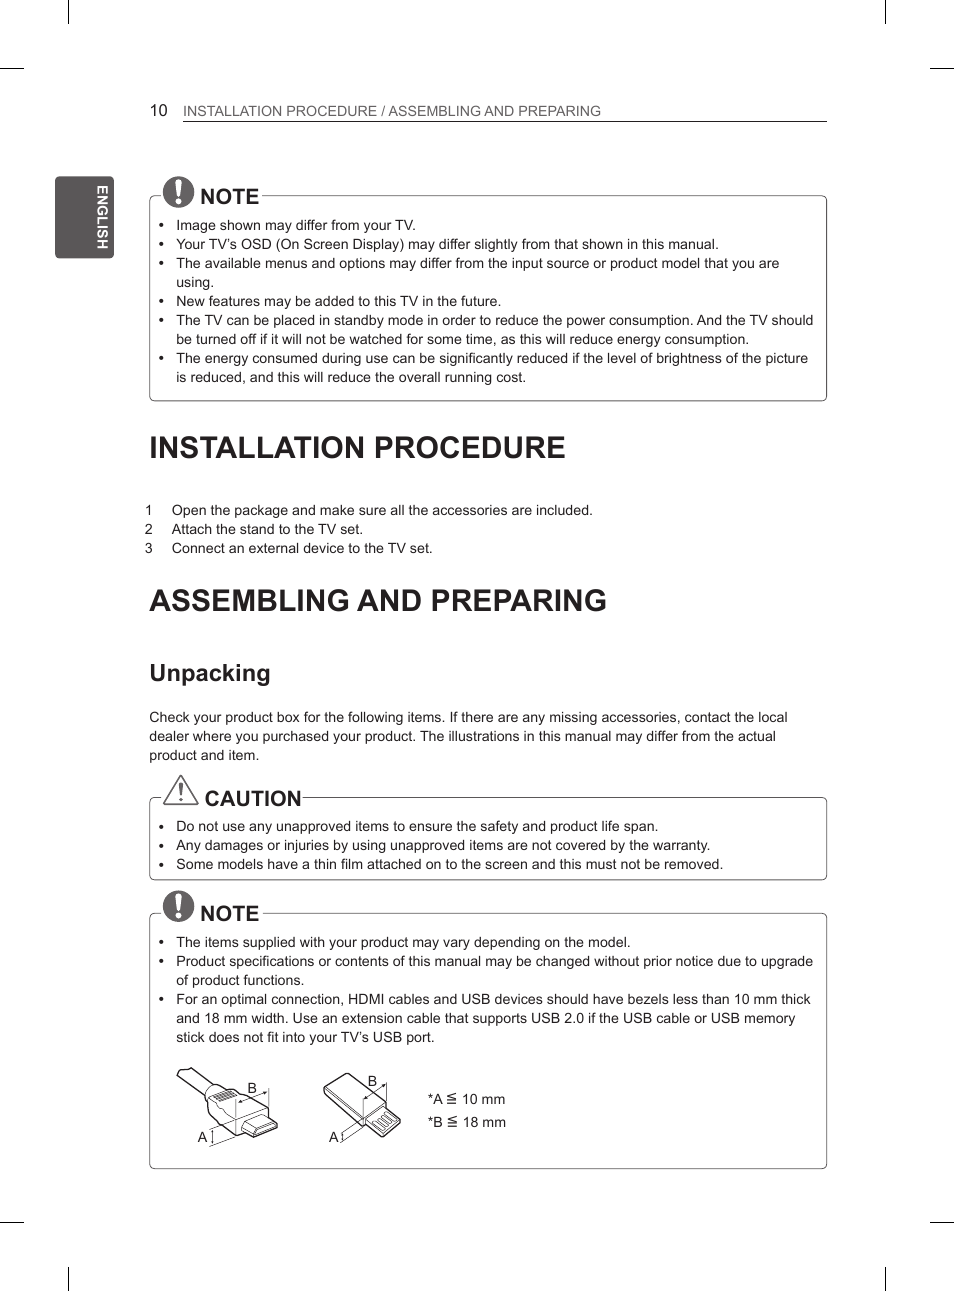 Installation procedure, Assembling and preparing, Unpacking | Caution | LG 42LS3400 User Manual | Page 18 / 397